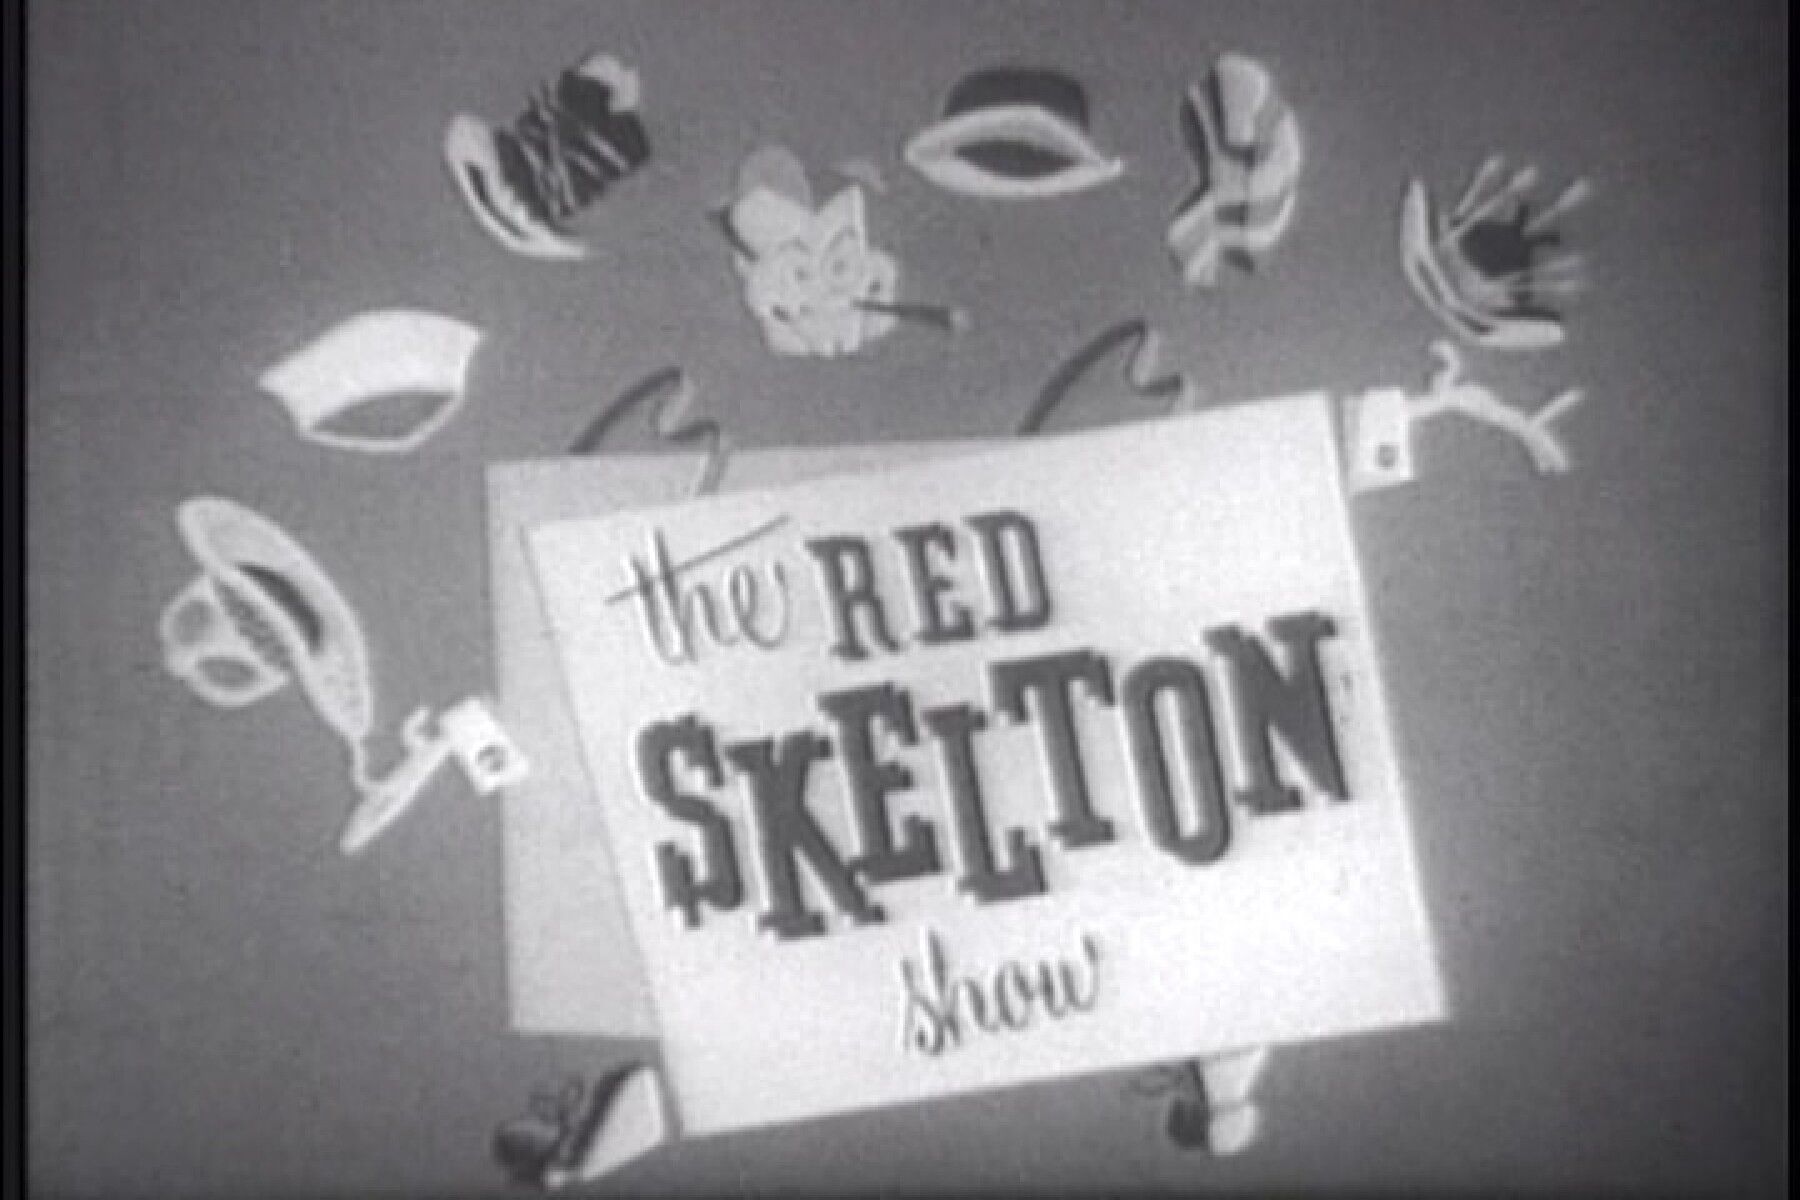 red skelton characters